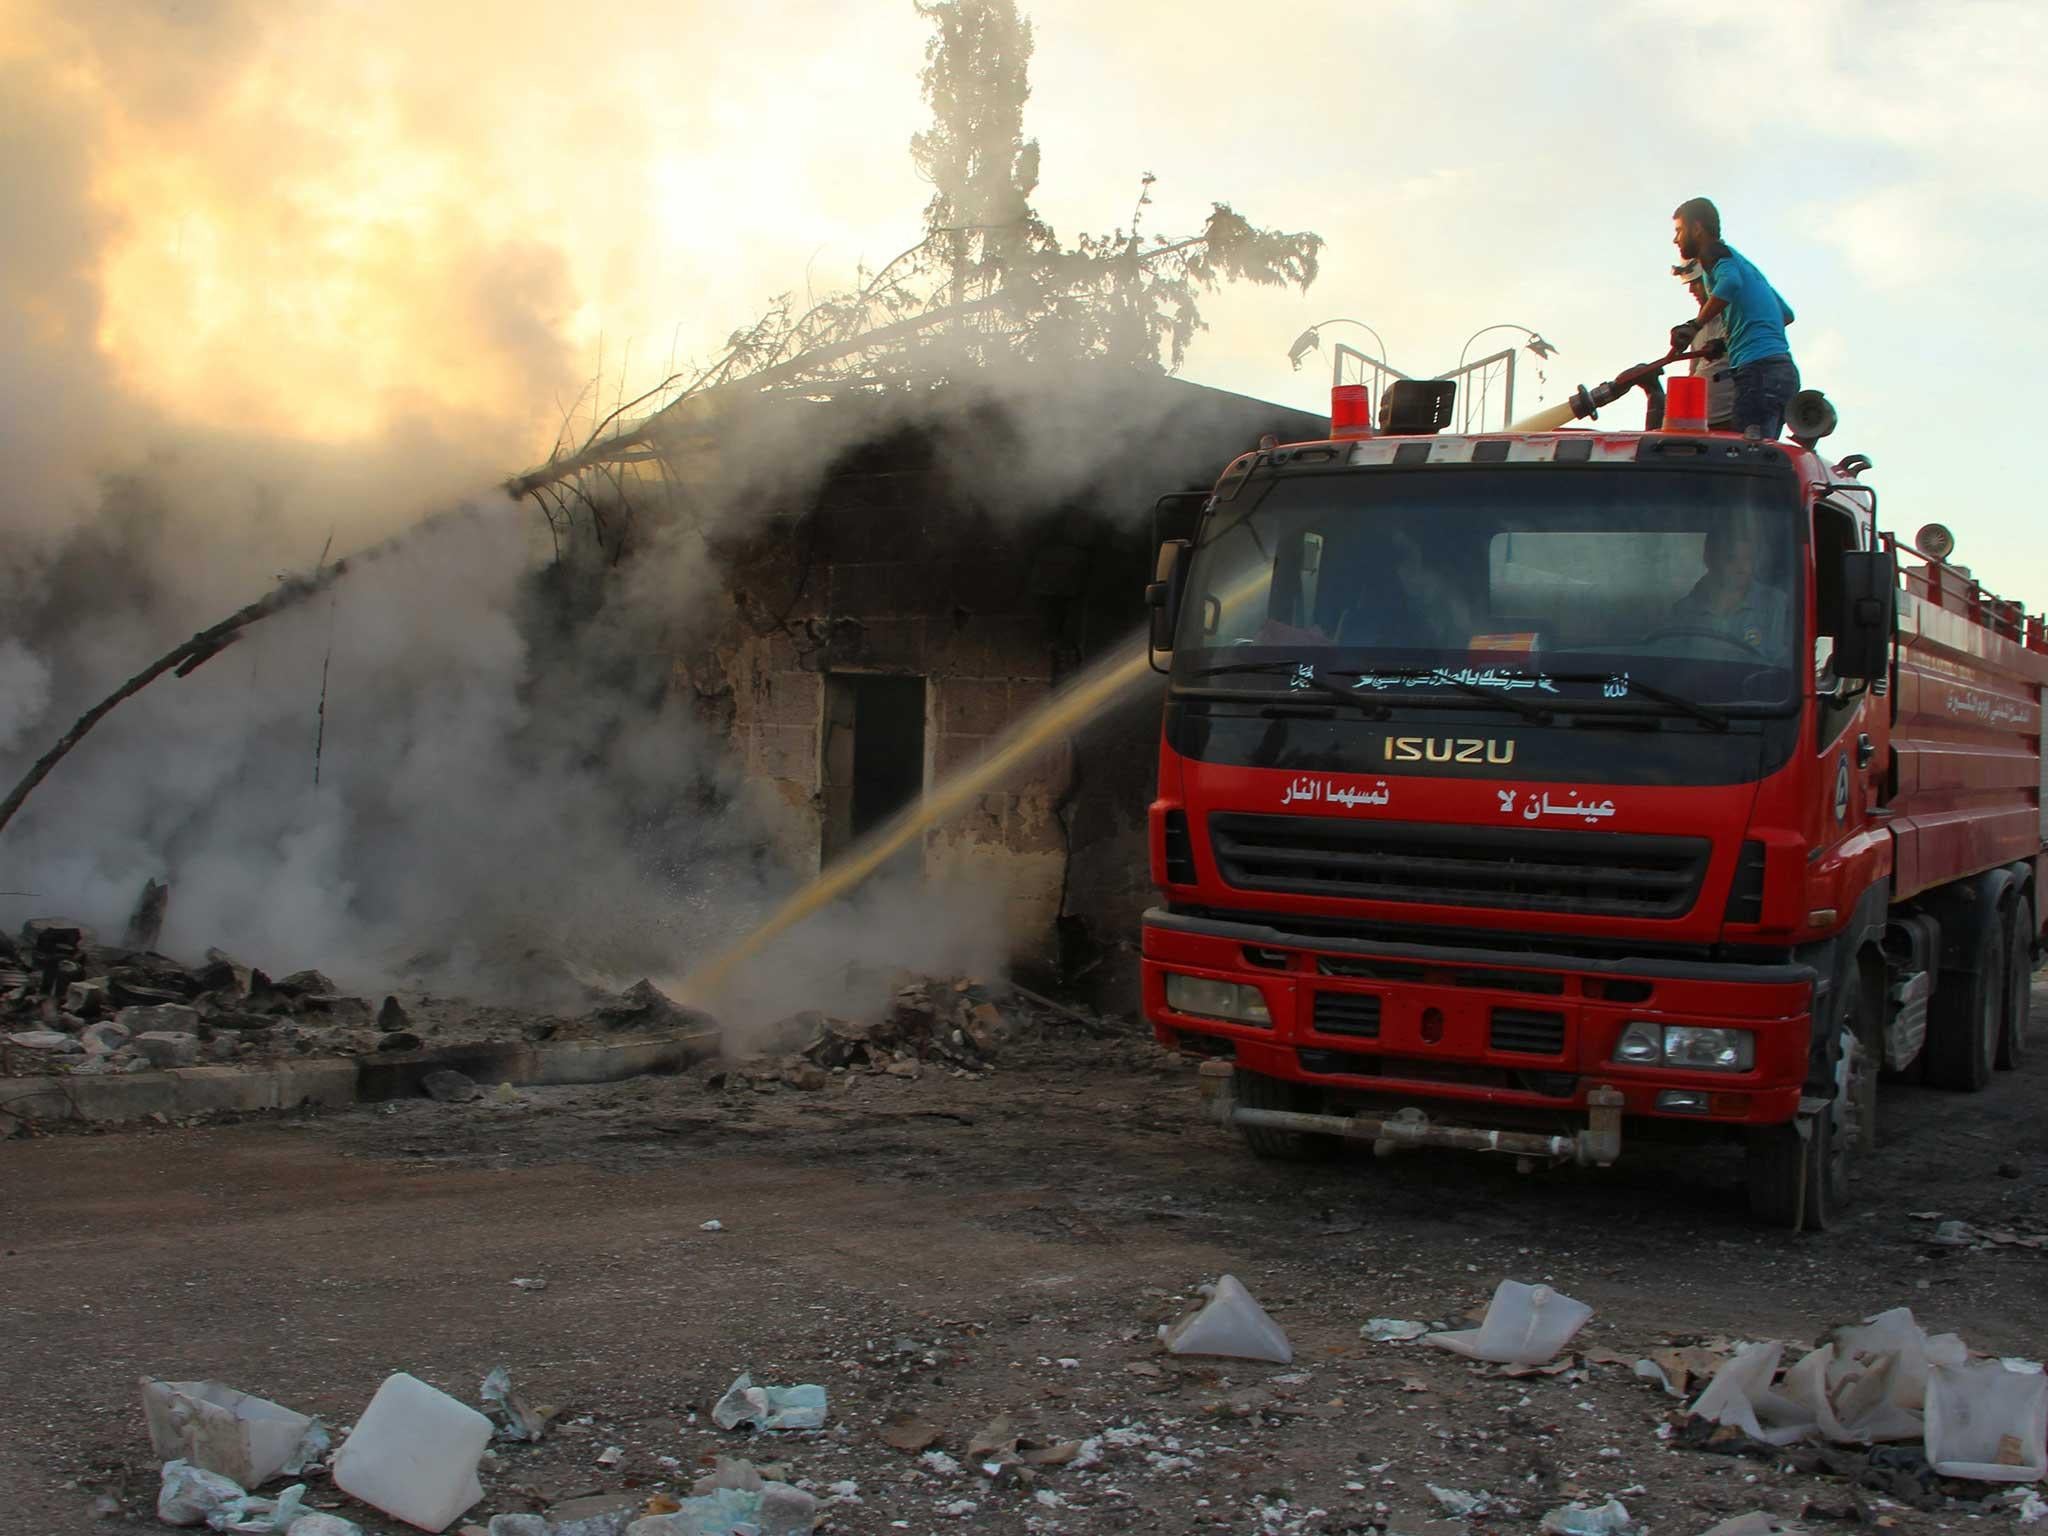 Aid for 78,000 people was destroyed in the attack near Aleppo on Monday 19th September